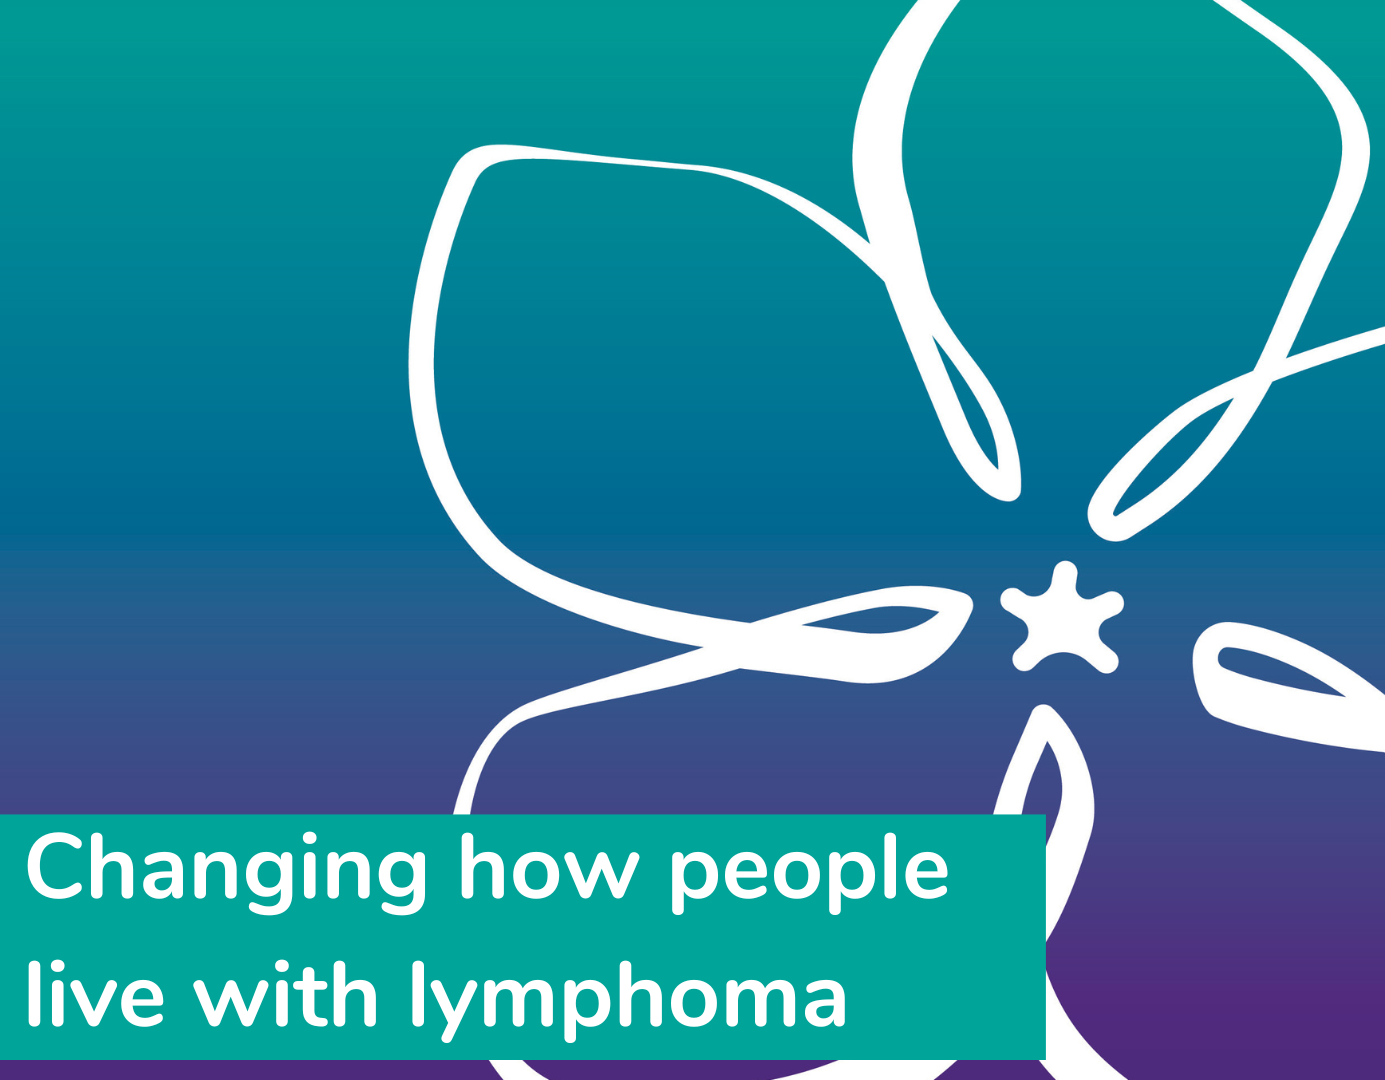 Changing how people live with lymphoma